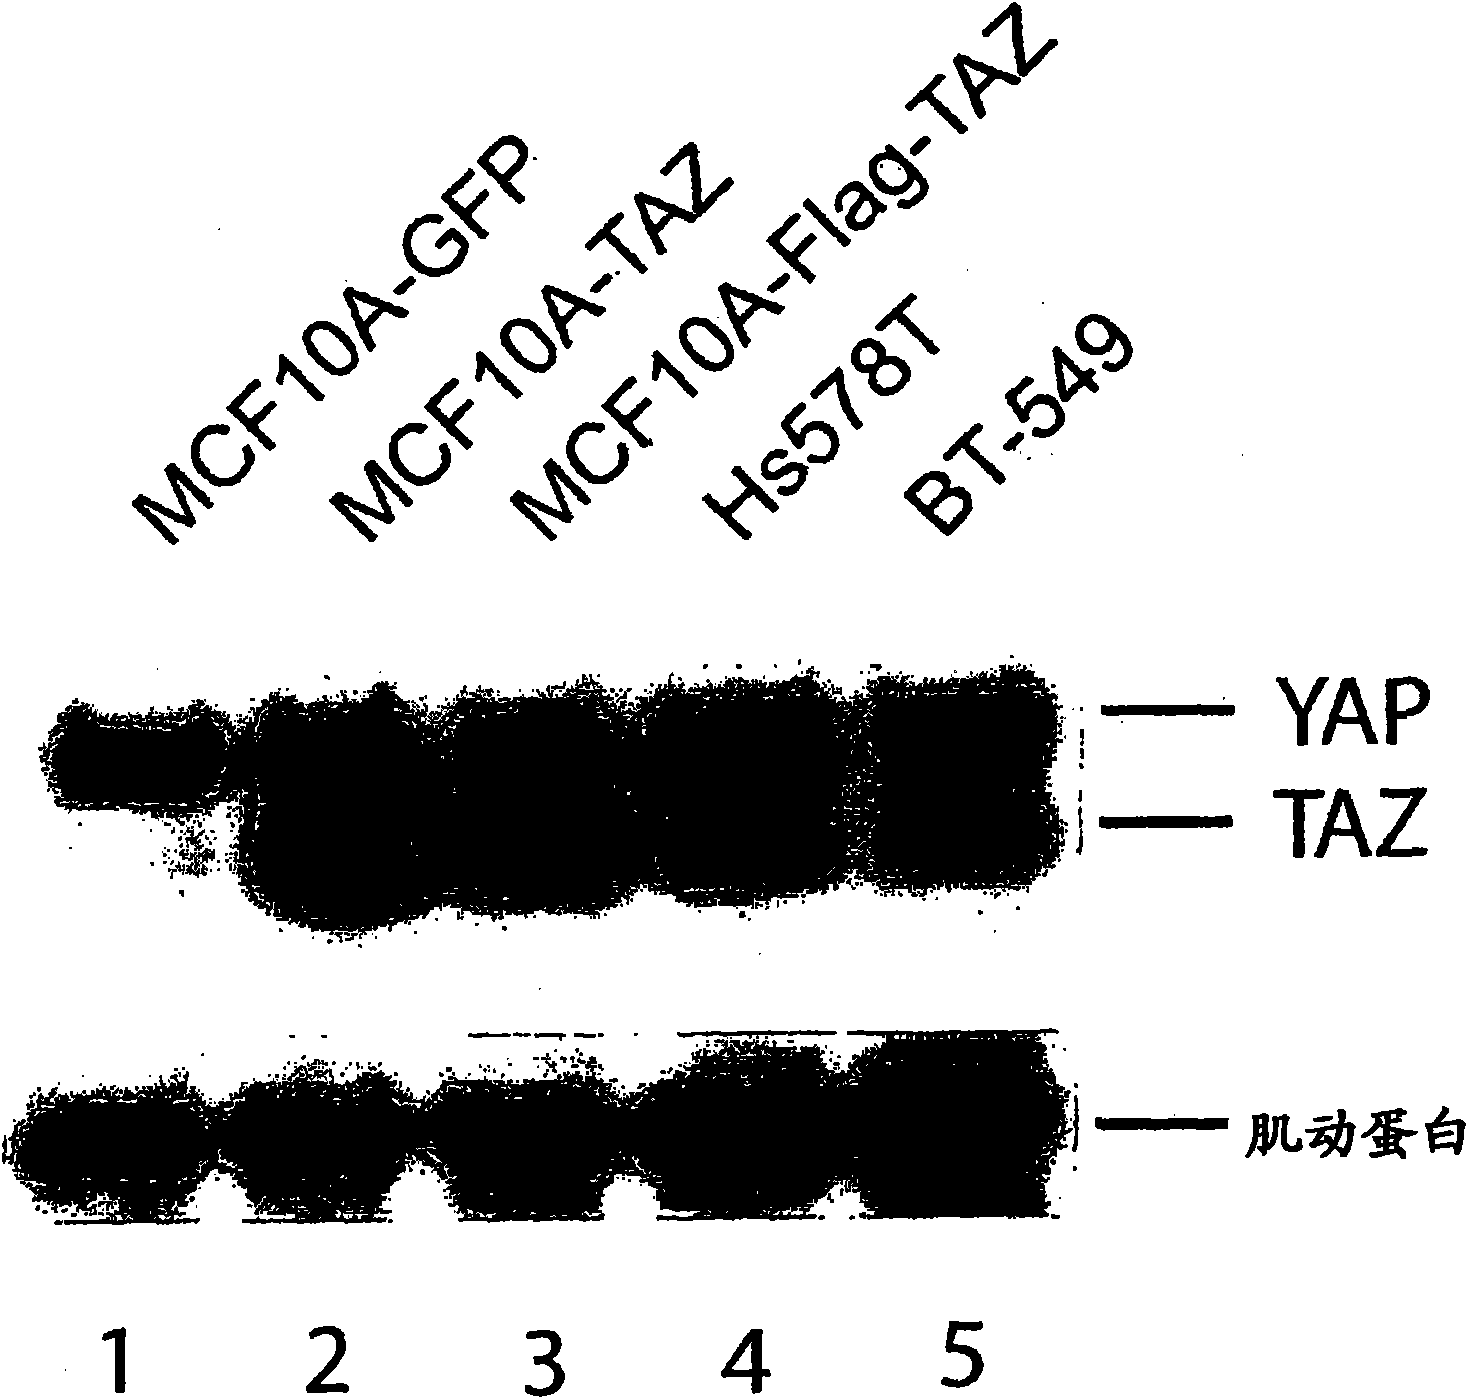 TAZ/WWTR1 for diagnosis and treatment of cancer